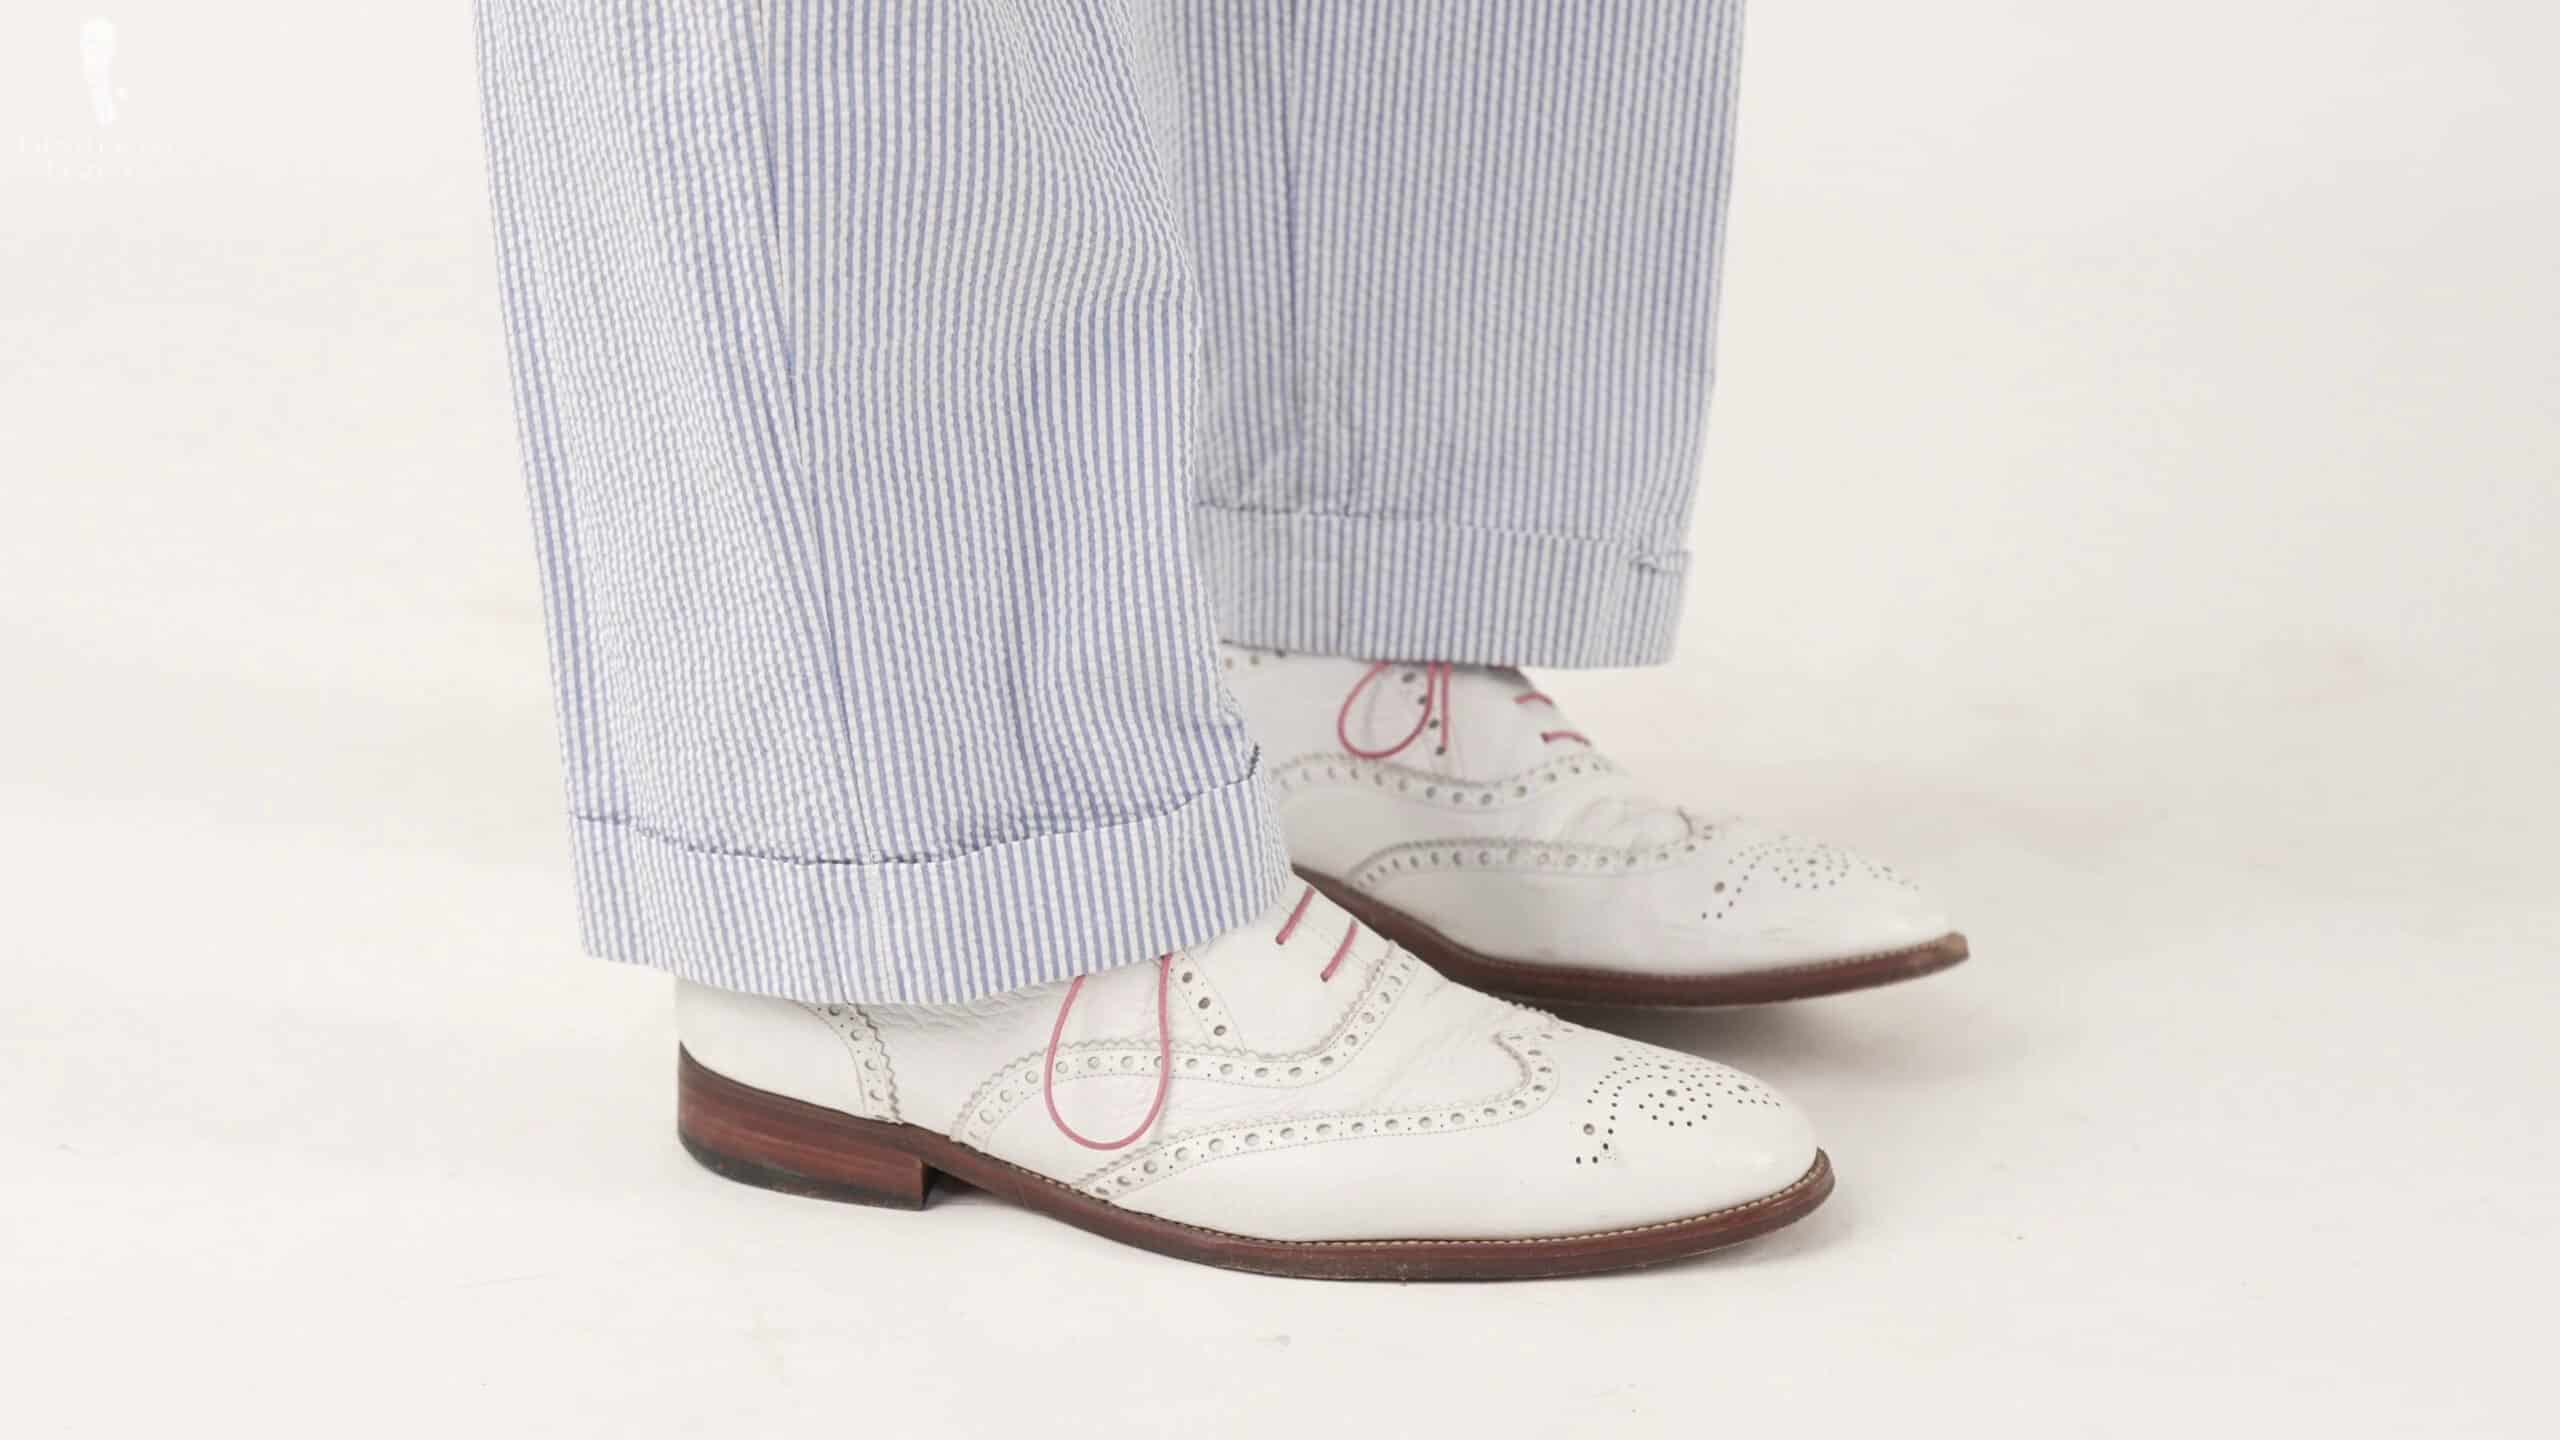 Raphael paired this look with white buckskin Oxfords.